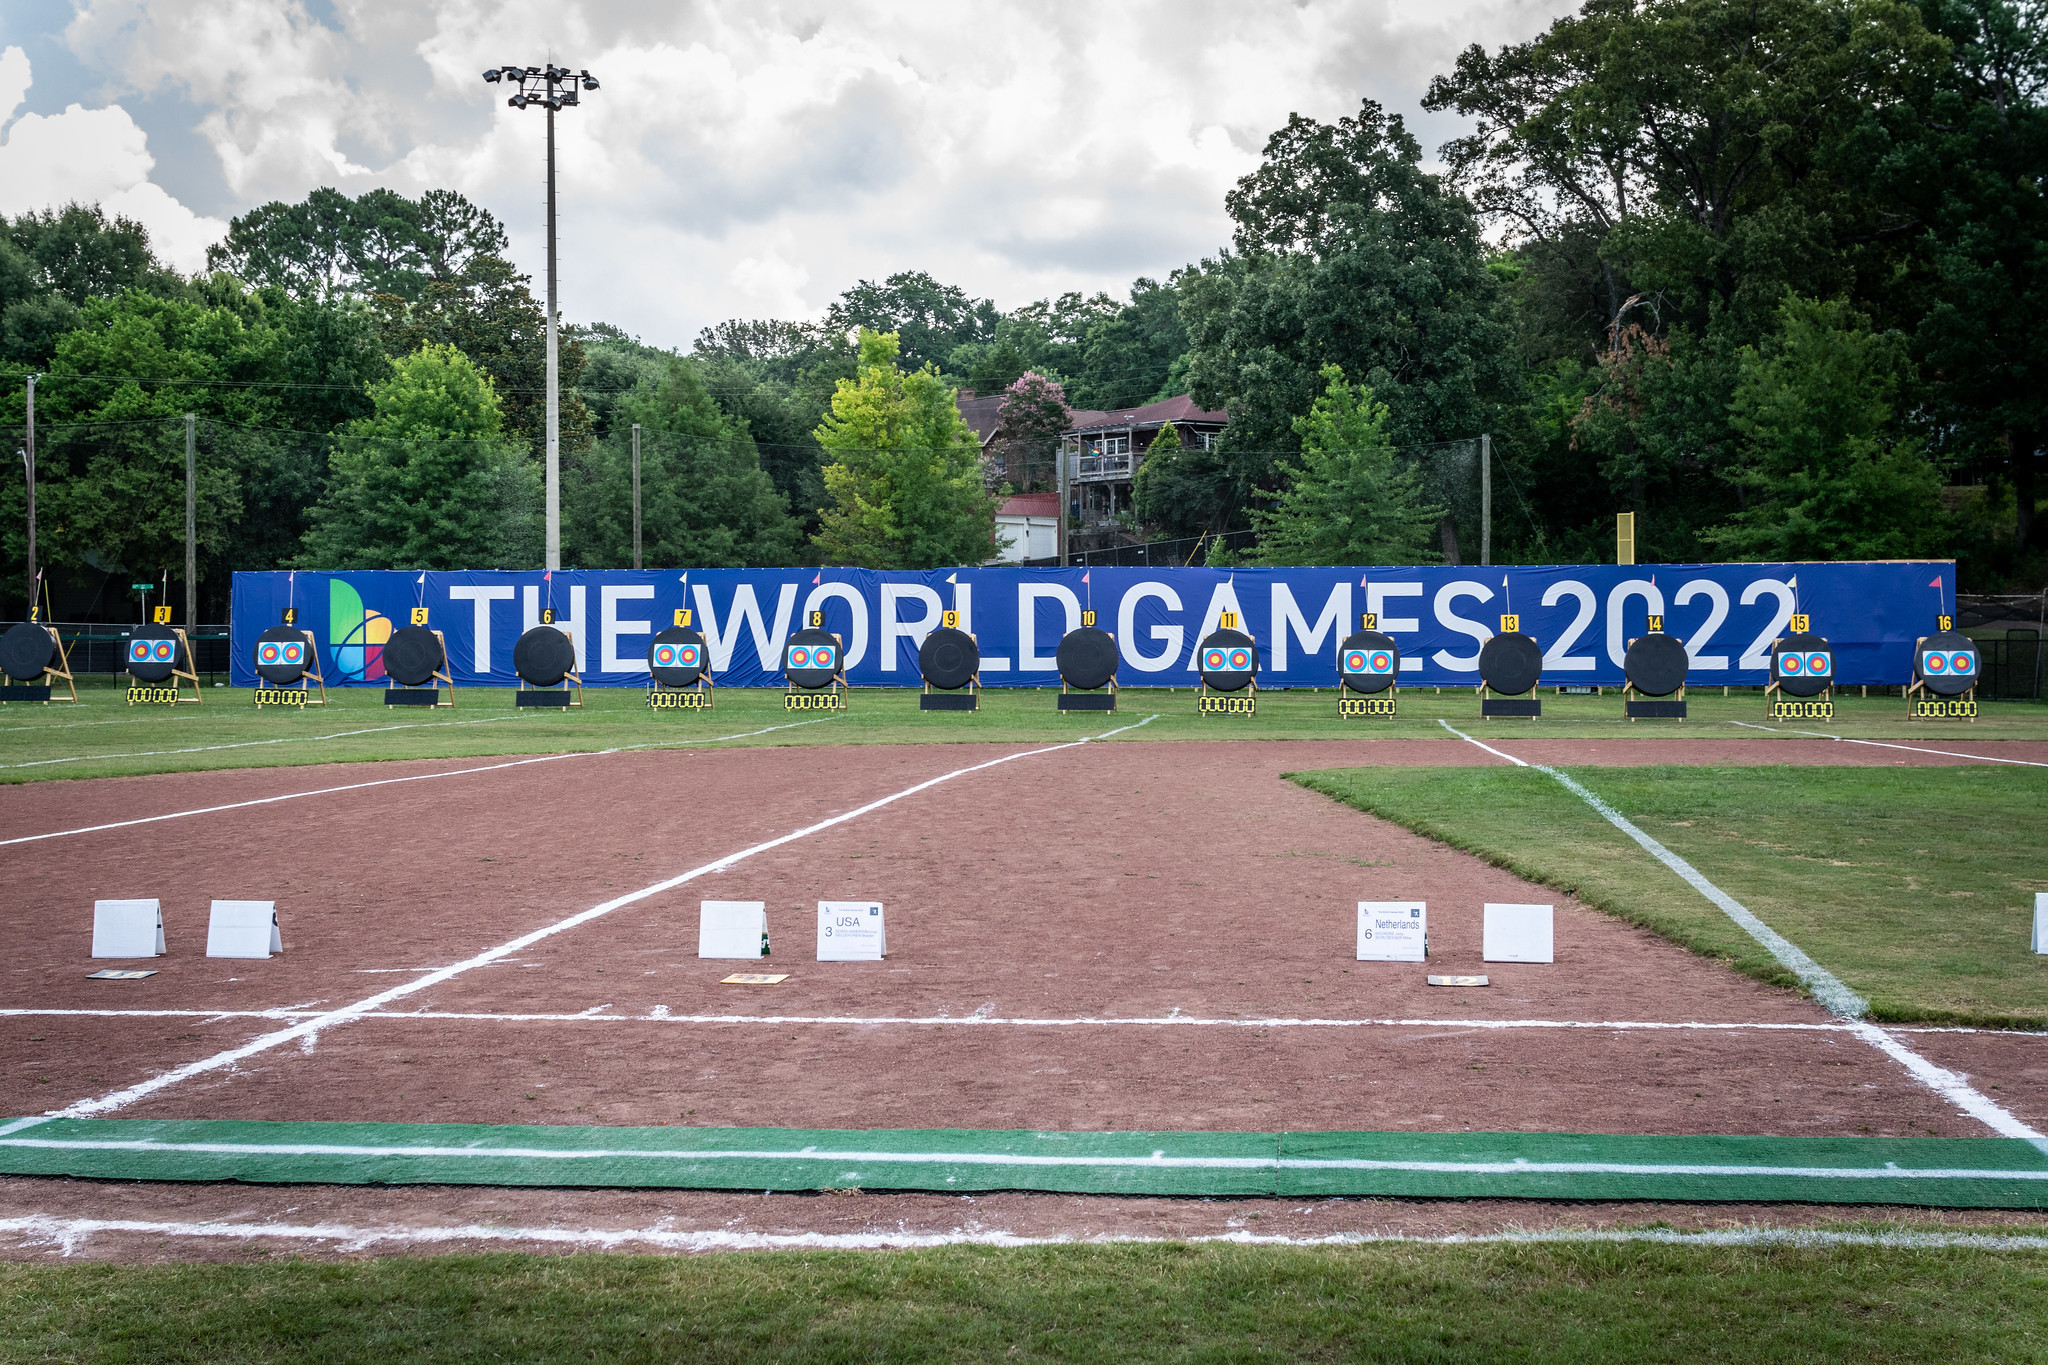 The scene for the opening day of the archery event at Birmingham 2022 ©The World Games